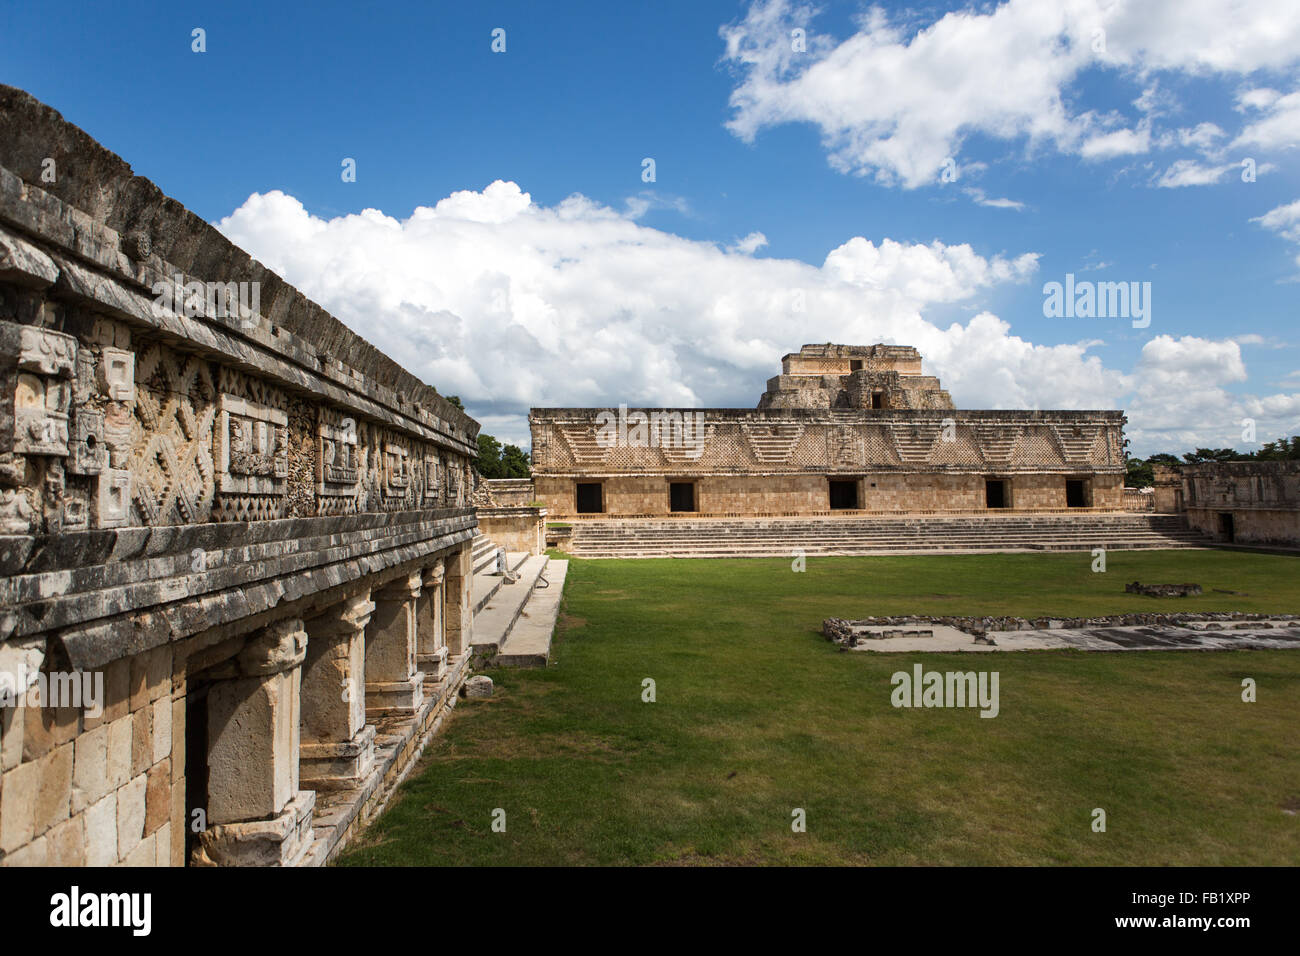 Nunnery Quadrangle, part of the ruins at Uxmal, Yucatan, Mexico. It is an ancient Maya city of the classical period. Stock Photo